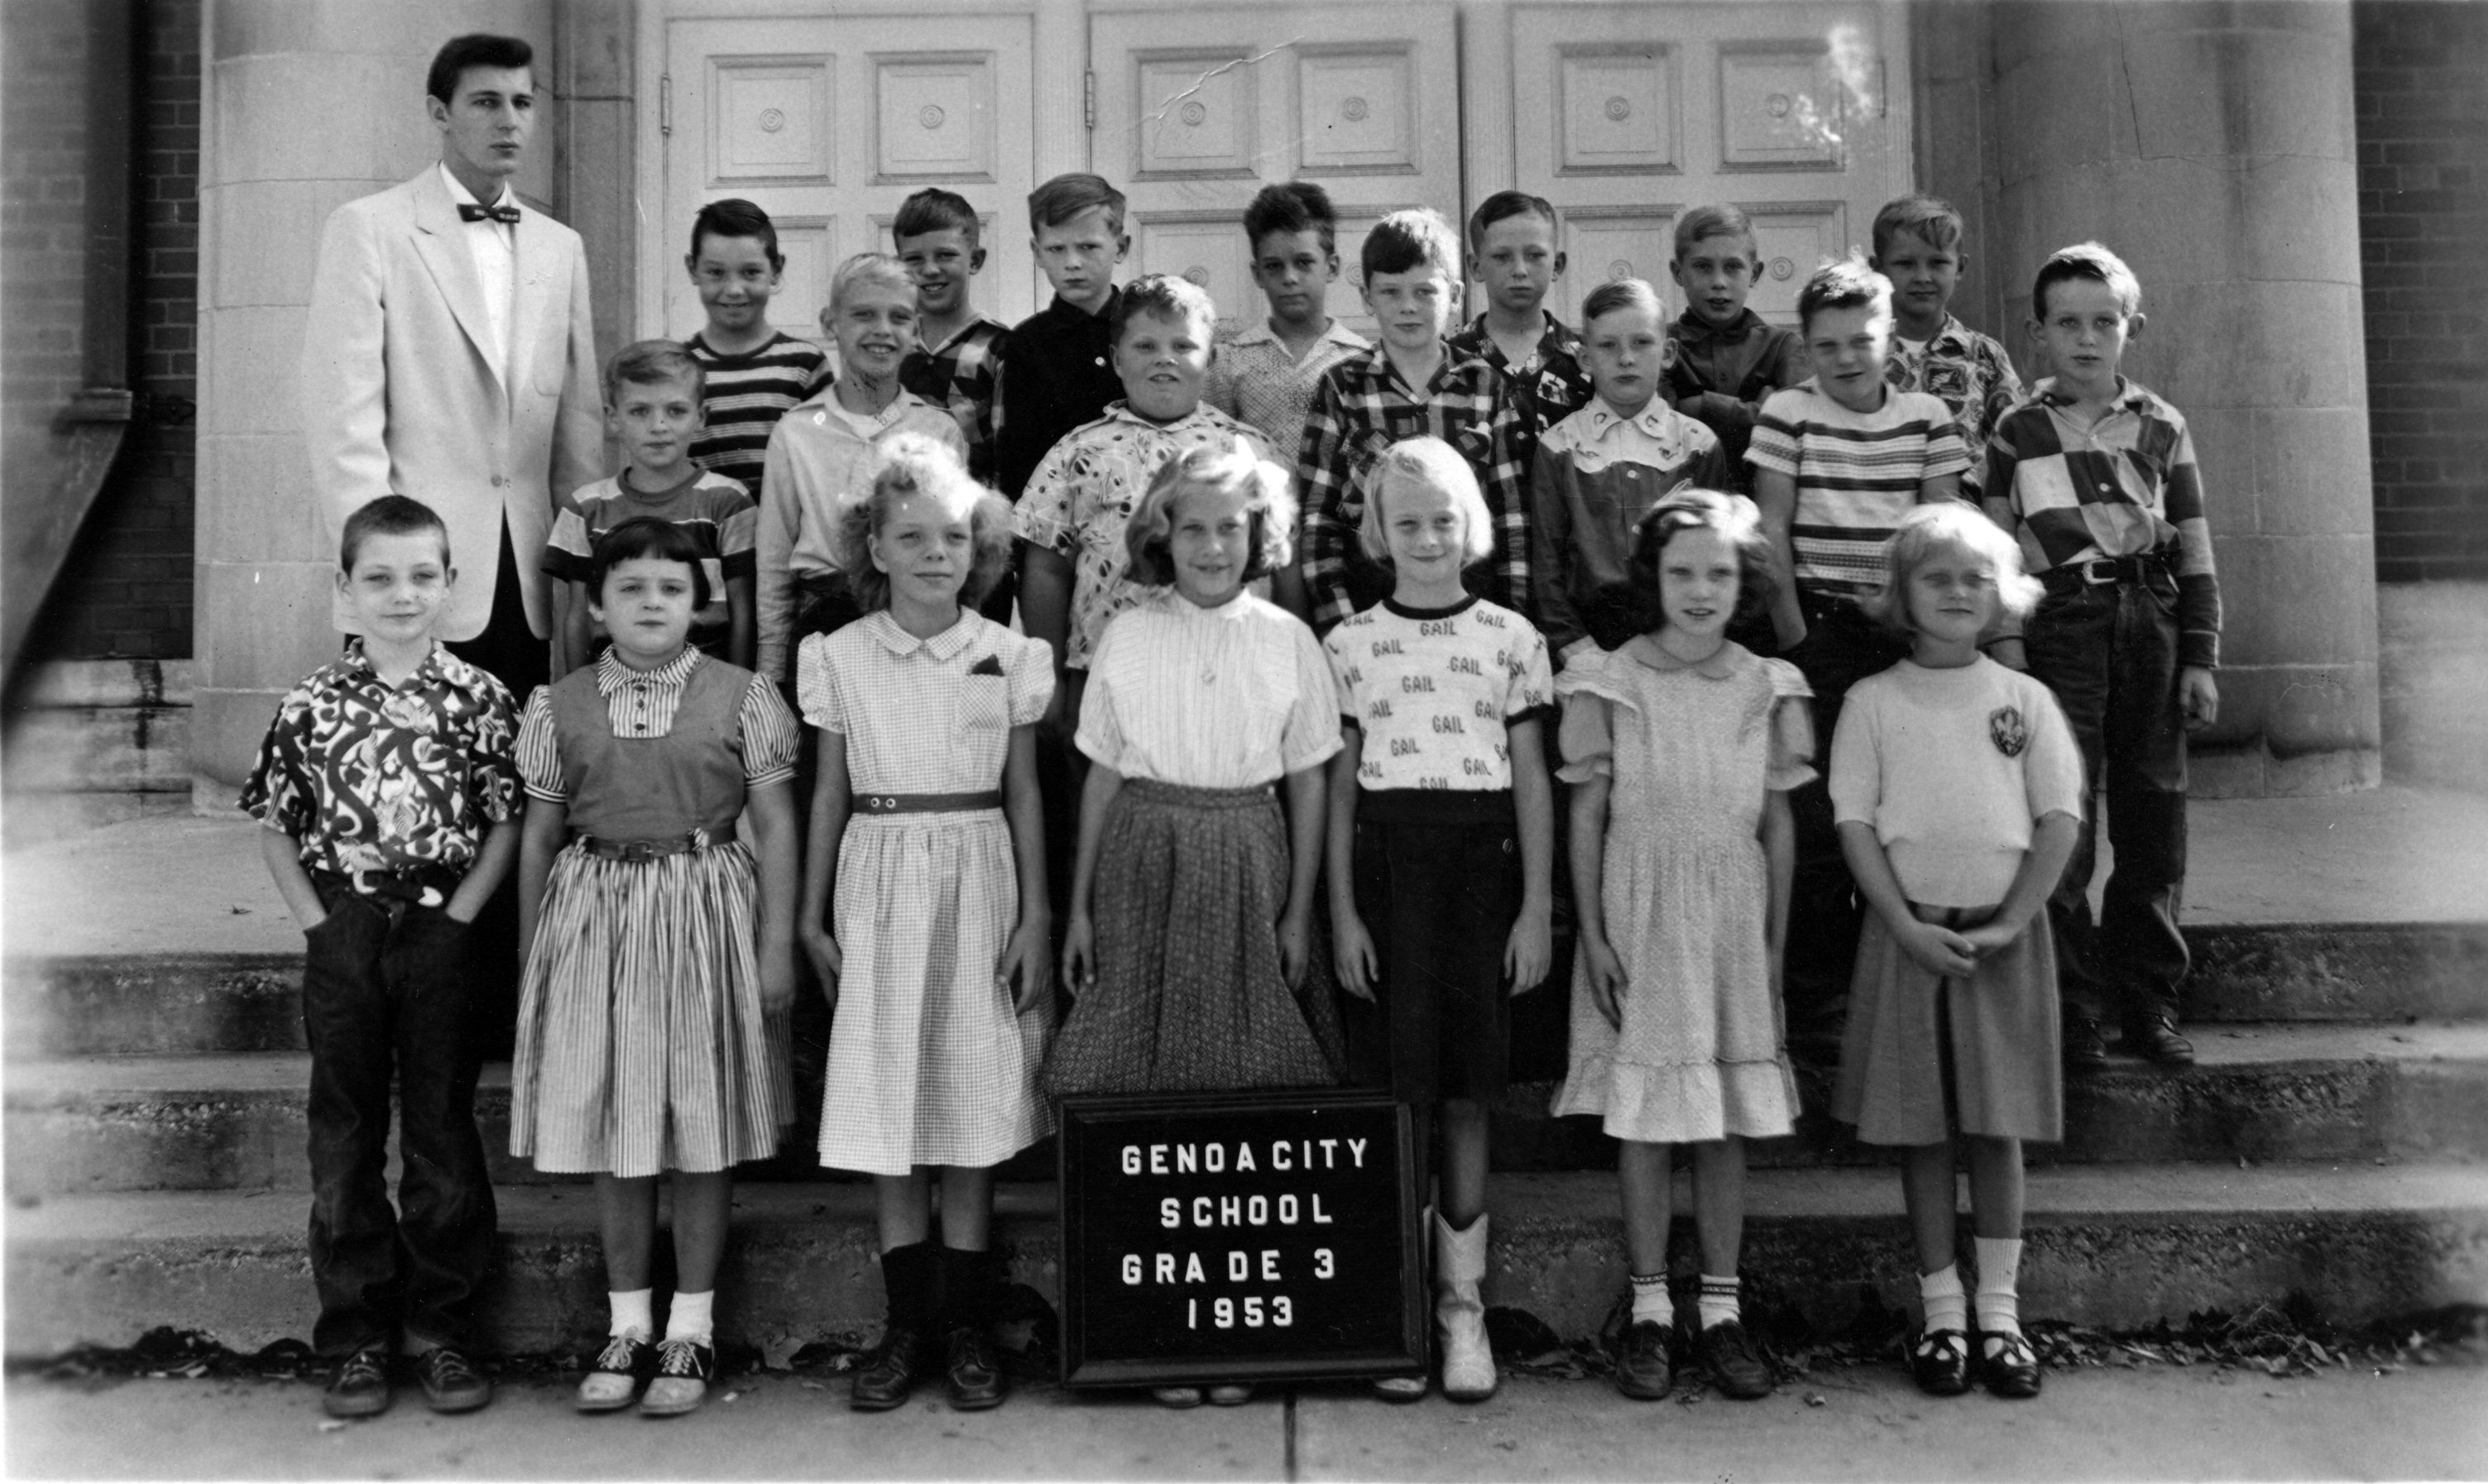 Class photo of the second grade on the front steps of the Genoa City school in 1953.